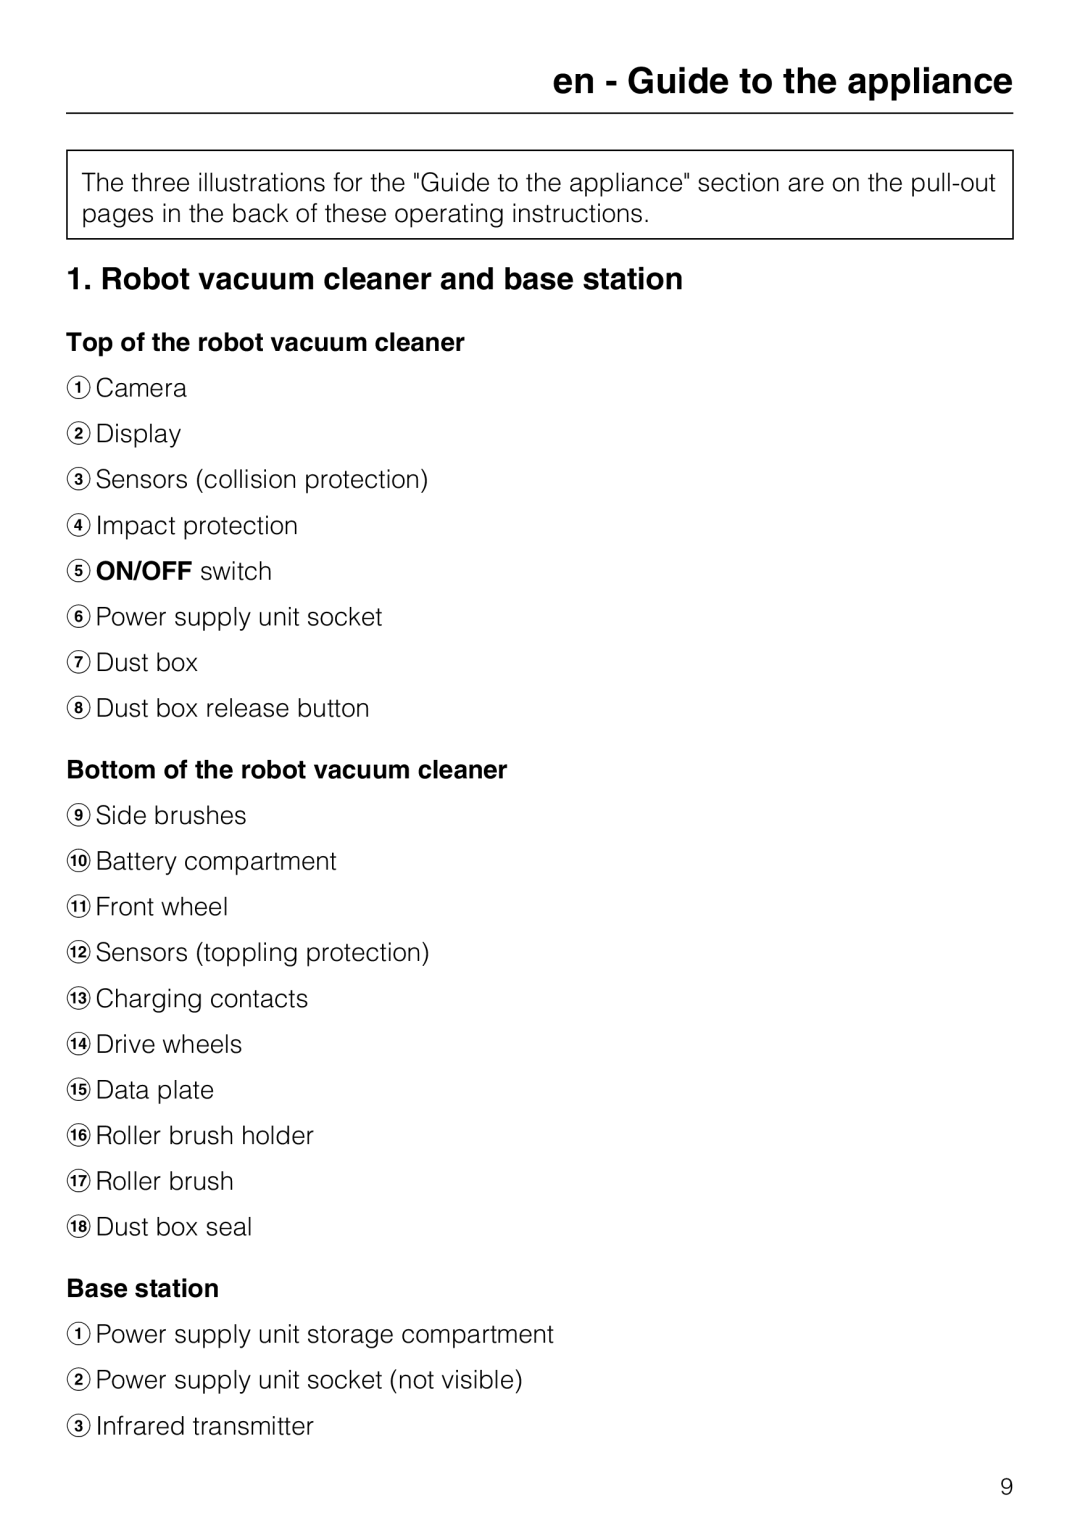 Miele HS17 manual en - Guide to the appliance, Robot vacuum cleaner and base station, Top of the robot vacuum cleaner 